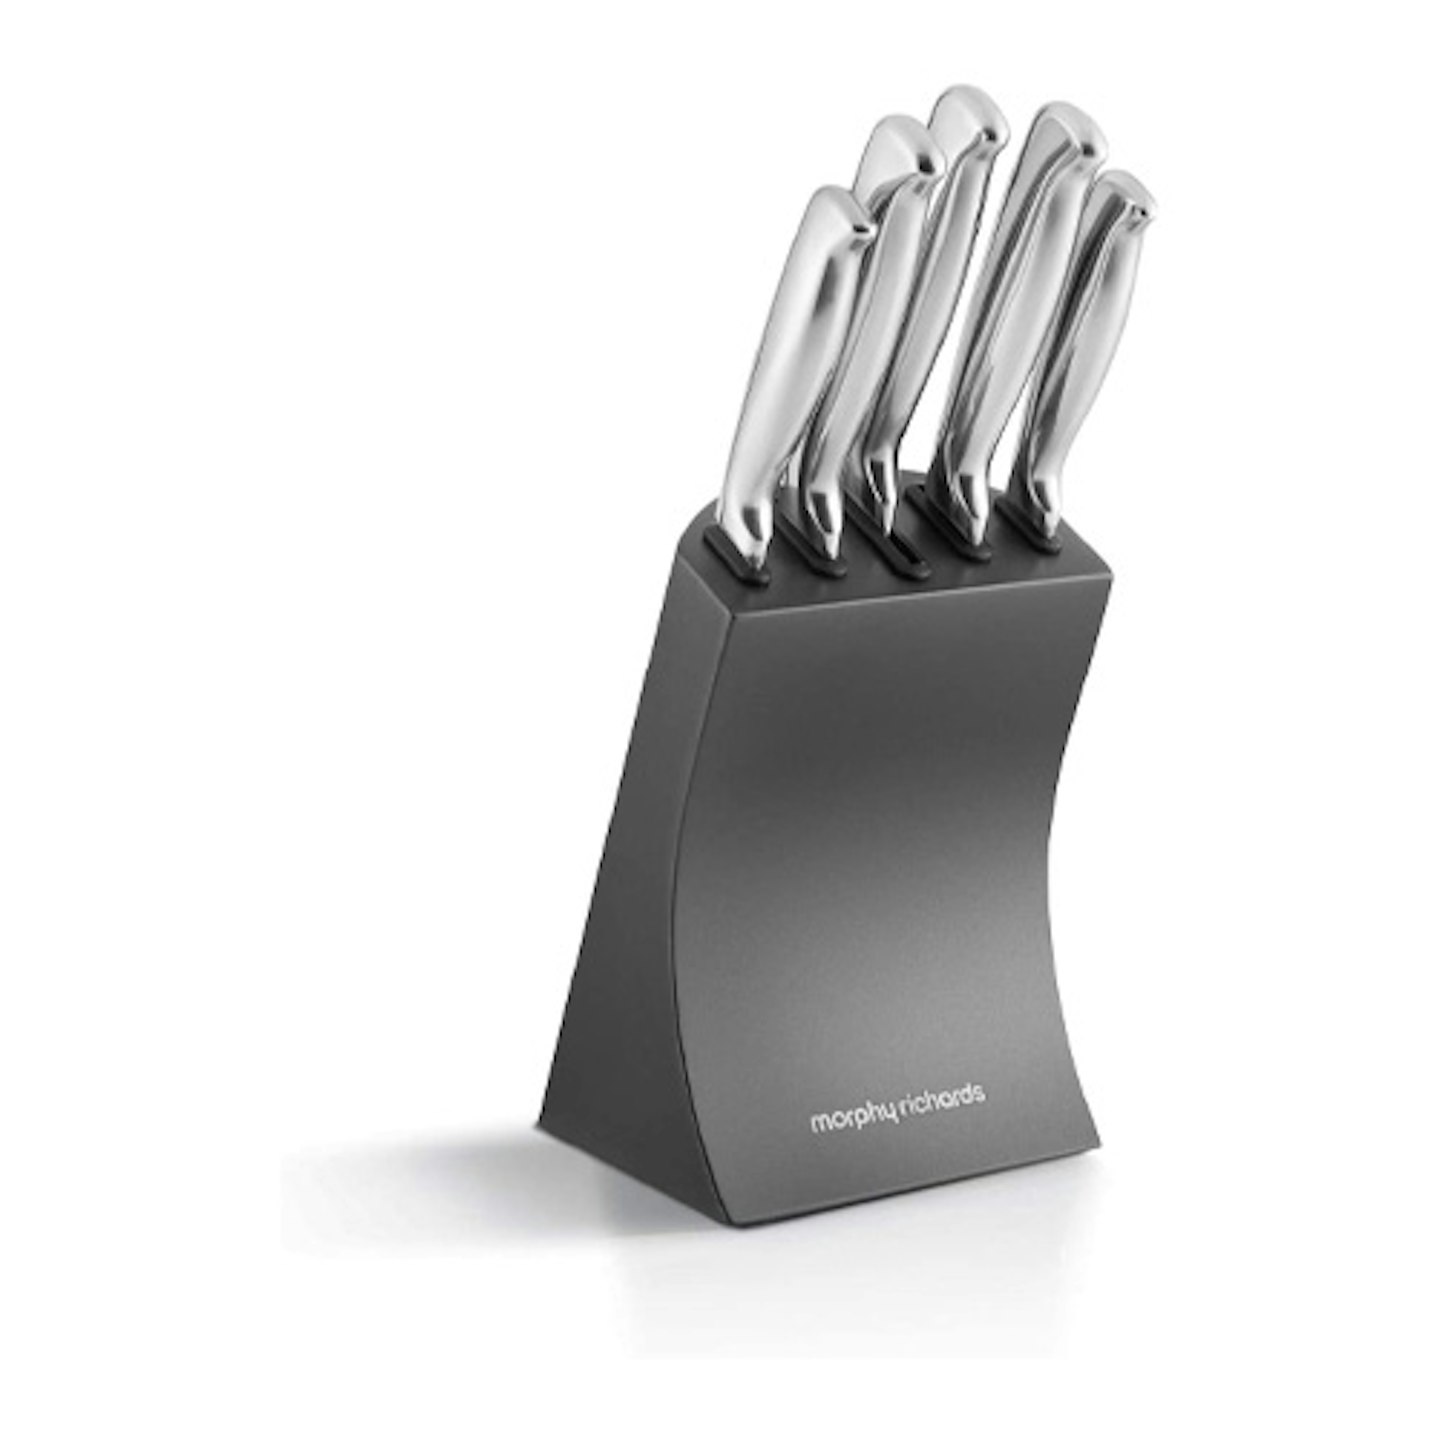 Morphy Richards Accents 974823 5 Piece Knife Block with High Grade Polished Stainless Steel, Titanium